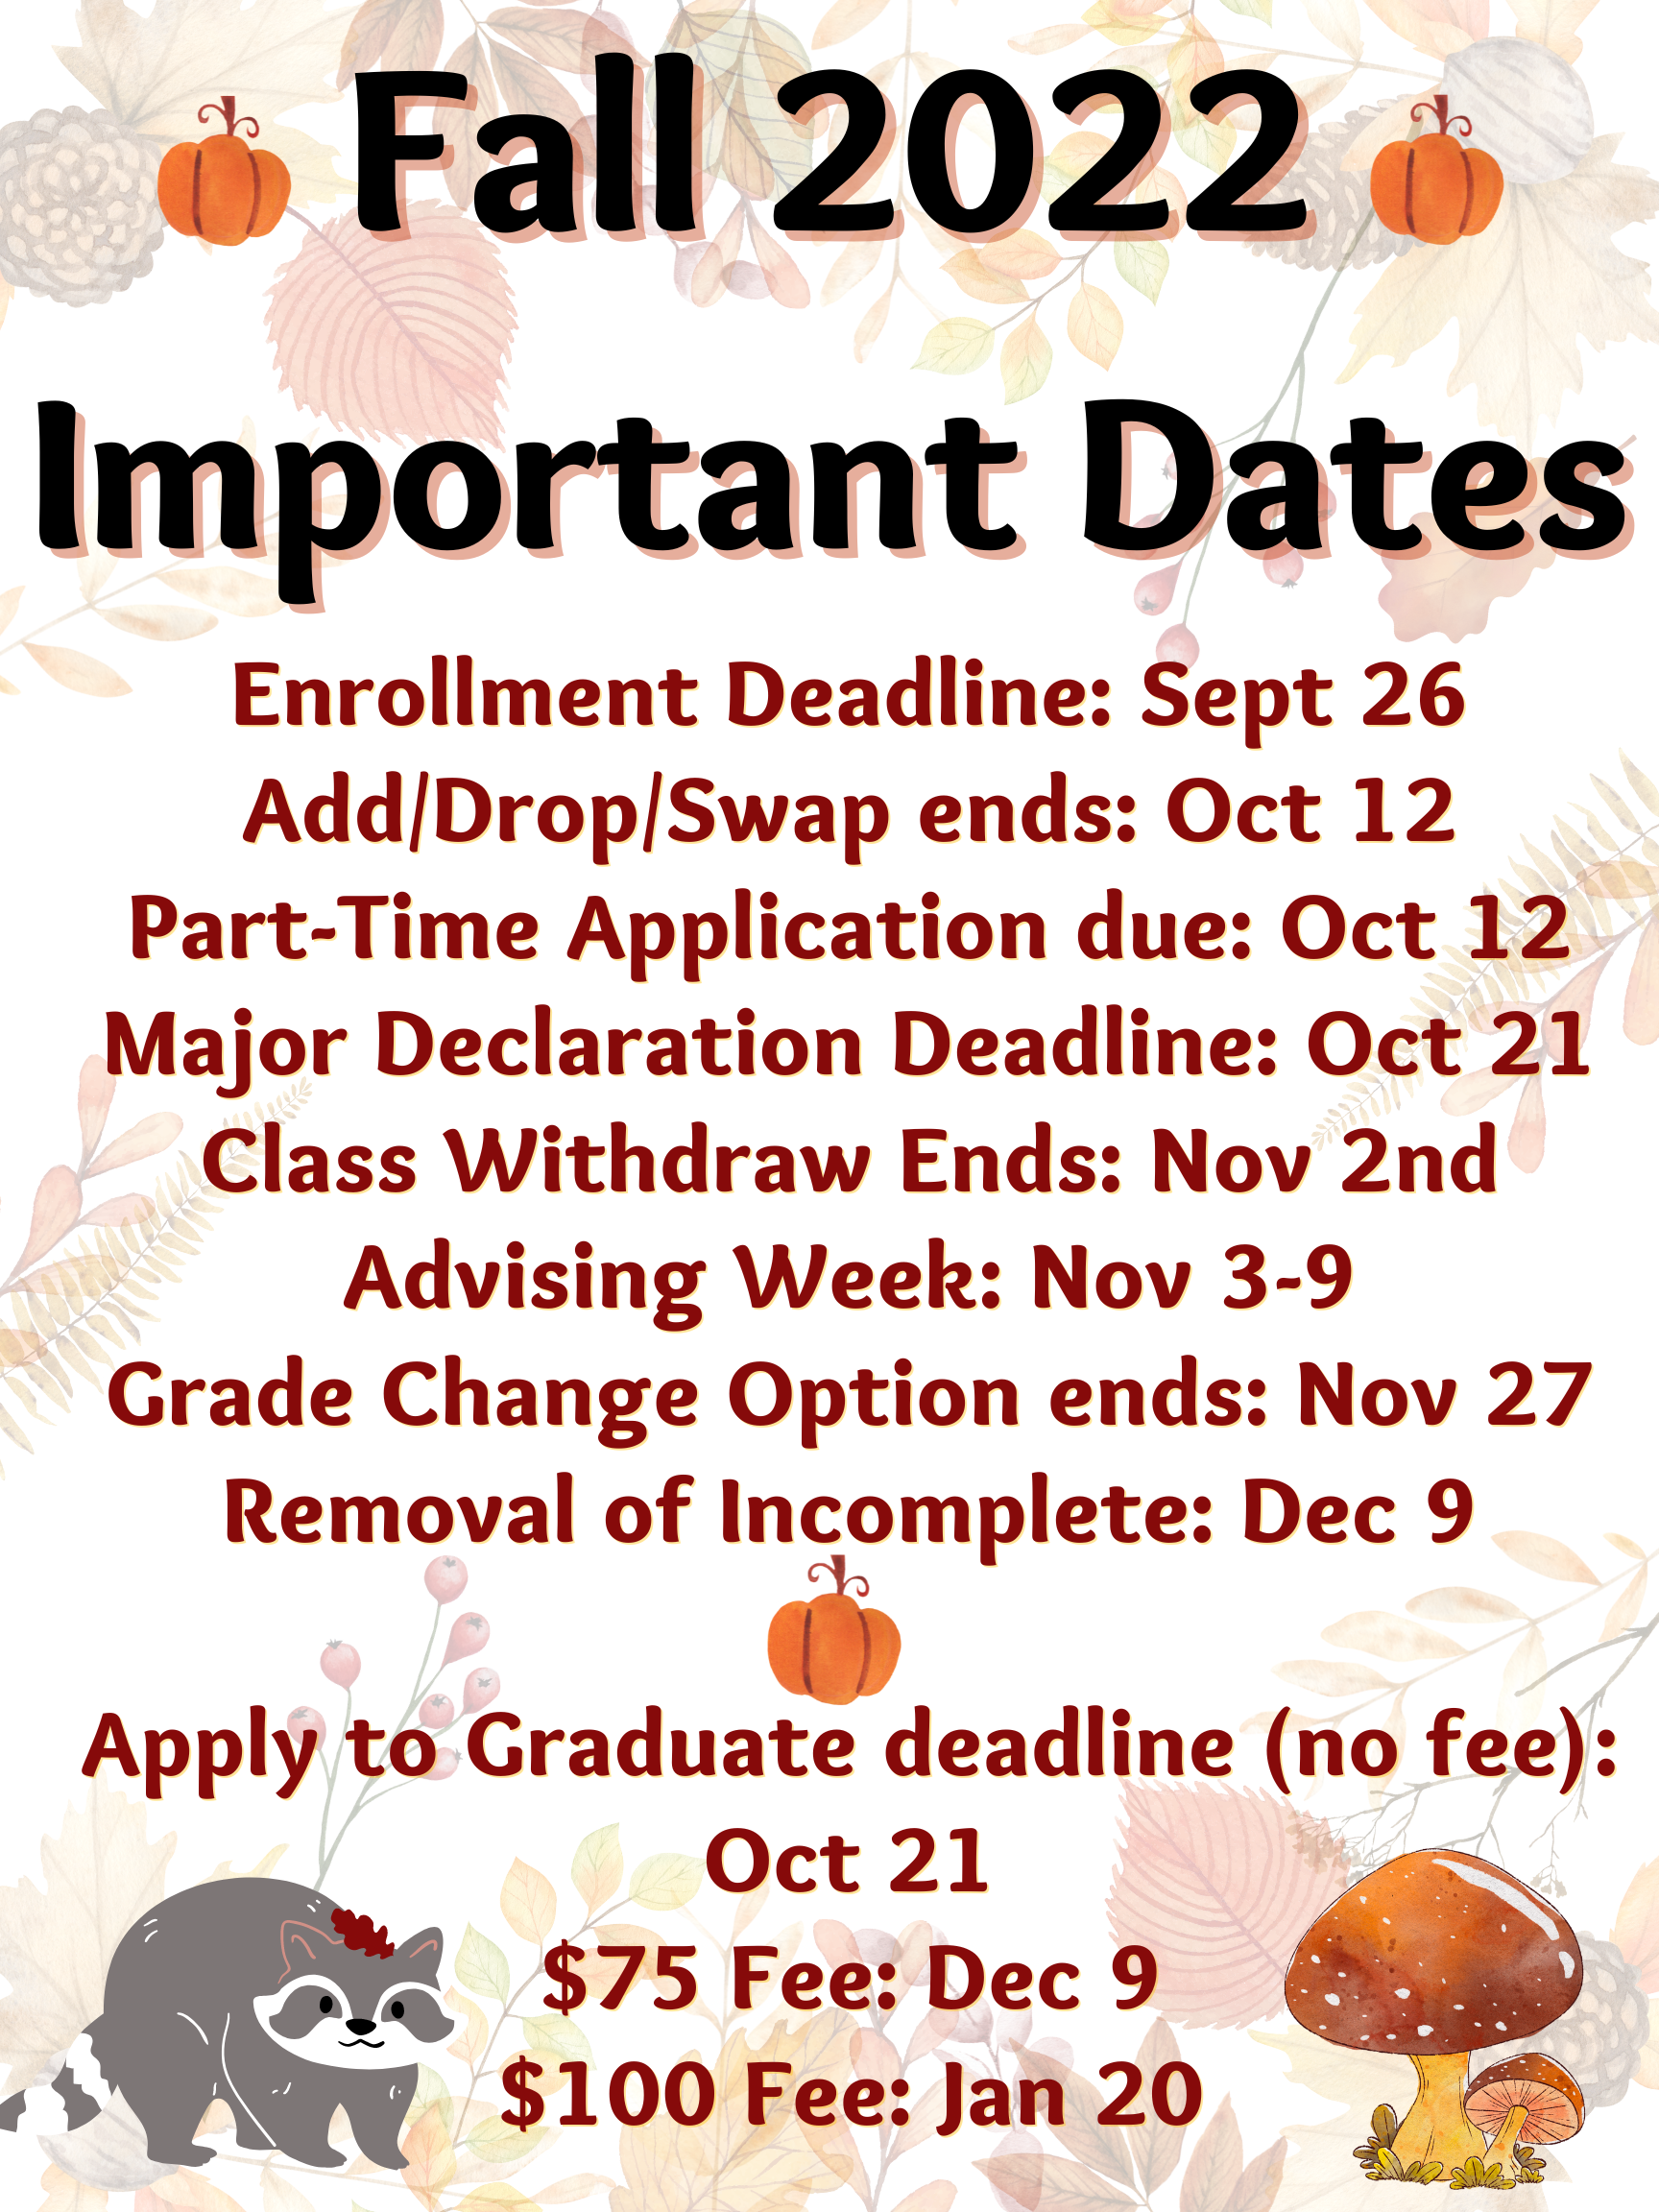 fall-2022-important-dates-1.png